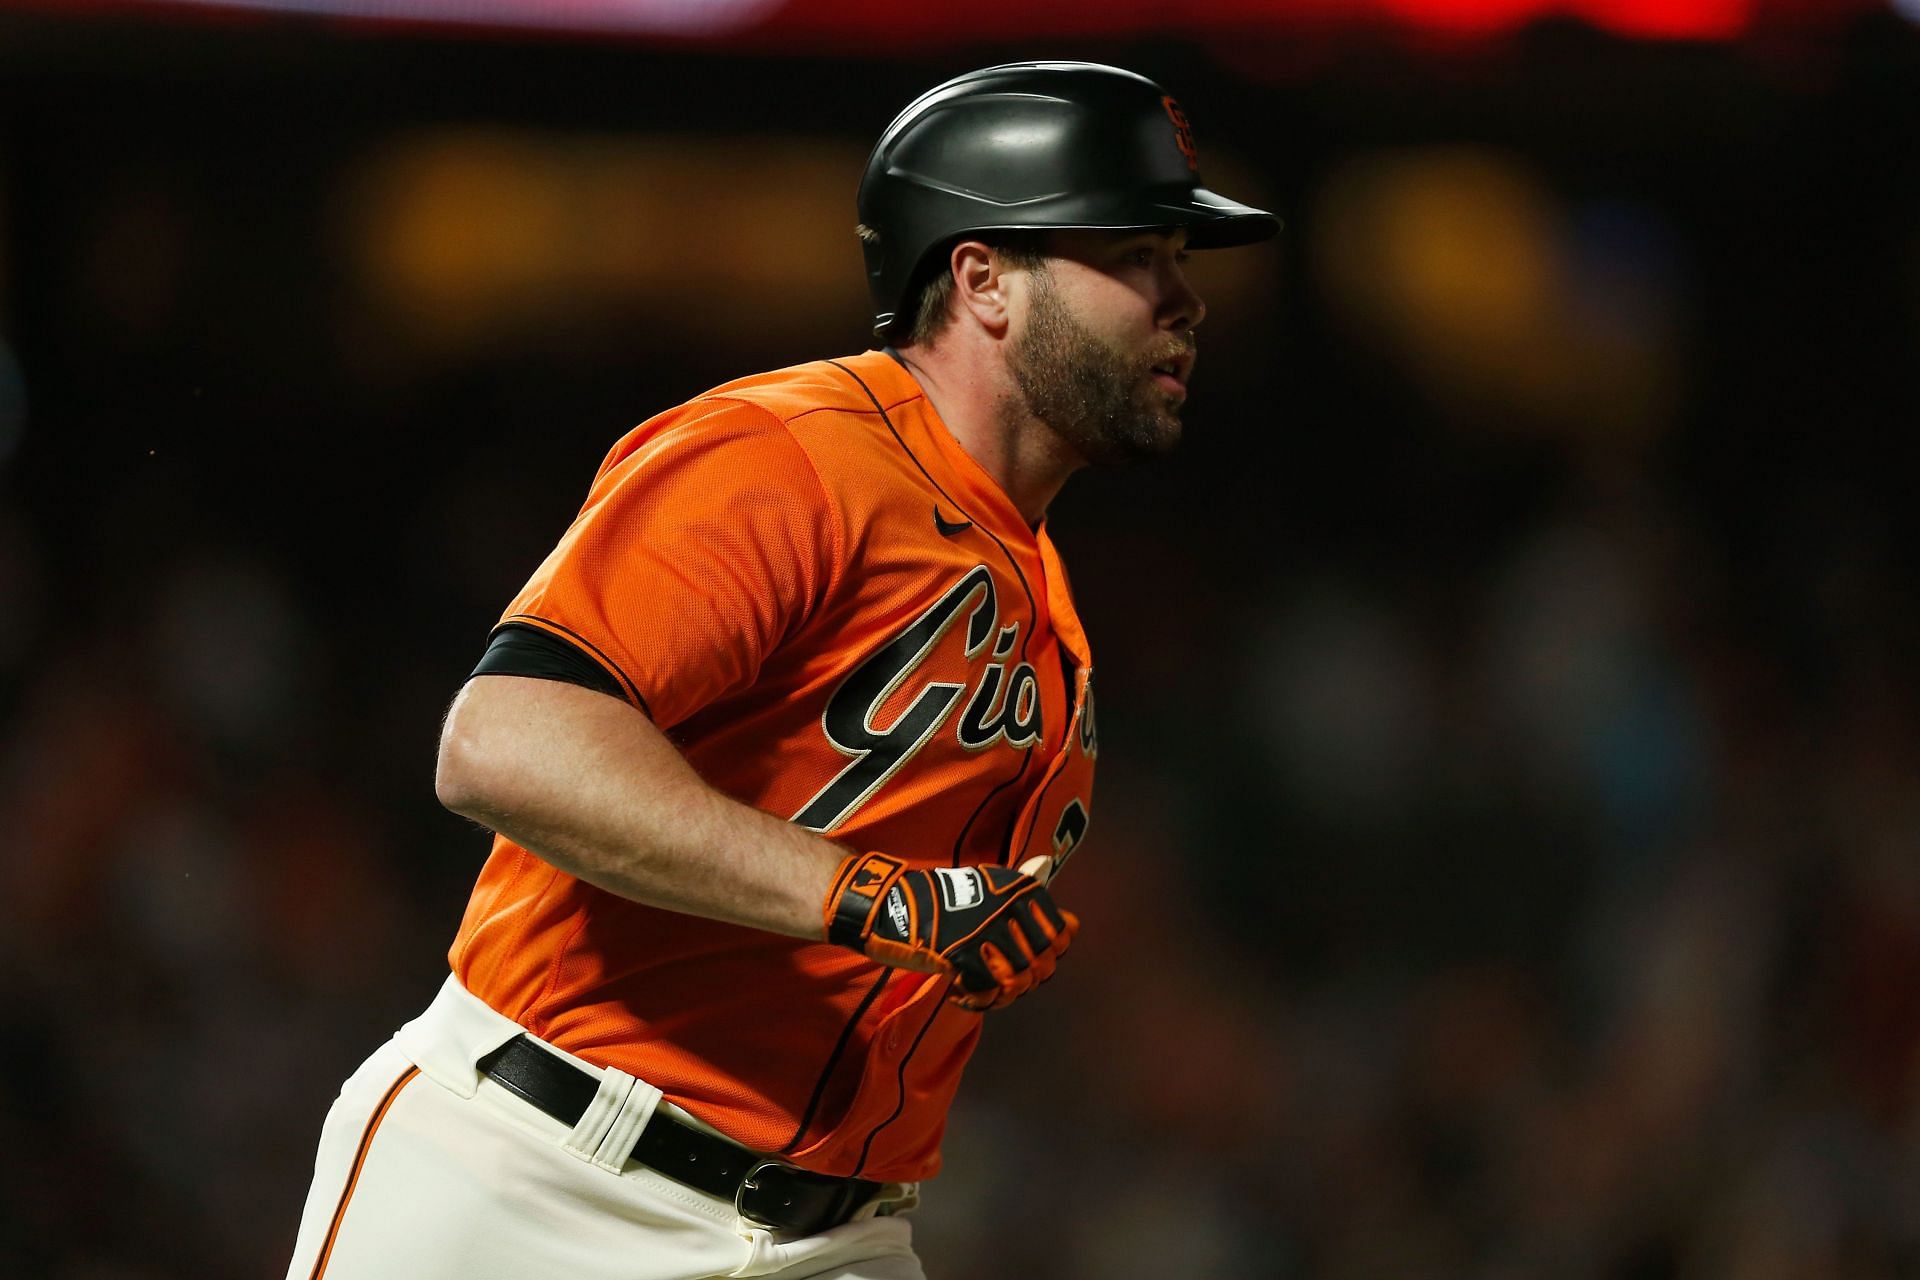 "He was one of the best hitters over there" San Francisco Giants boss